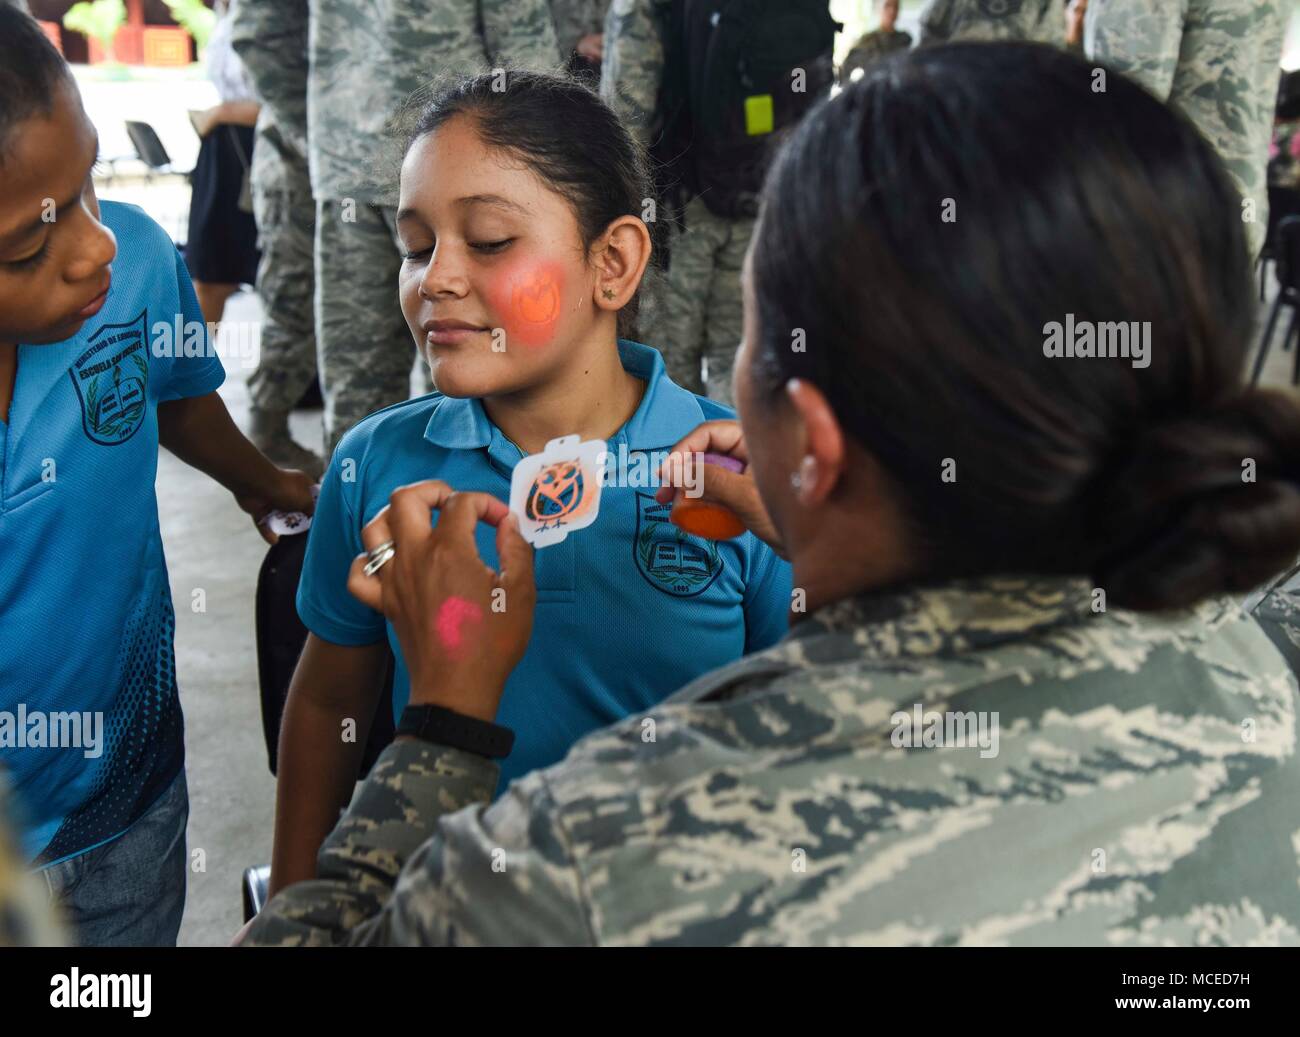 U.S. Air Force Tech. Sgt. Claudia Bryant, 346th Air Expeditionary Group security forces member, deployed from Tucson, Arizona, paints the face of a guest during the opening ceremony of Exercise New Horizons 2018, April 11, 2018 in Meteti, Panama. Exercise New Horizons is a joint training exercise where all branches of the U.S. military conduct training in civil engineer, medical and support services while benefiting the local community. During the exercise, U.S. military members will build three schools, one community center and a women’s health ward in the Meteti area. They will also work clo Stock Photo